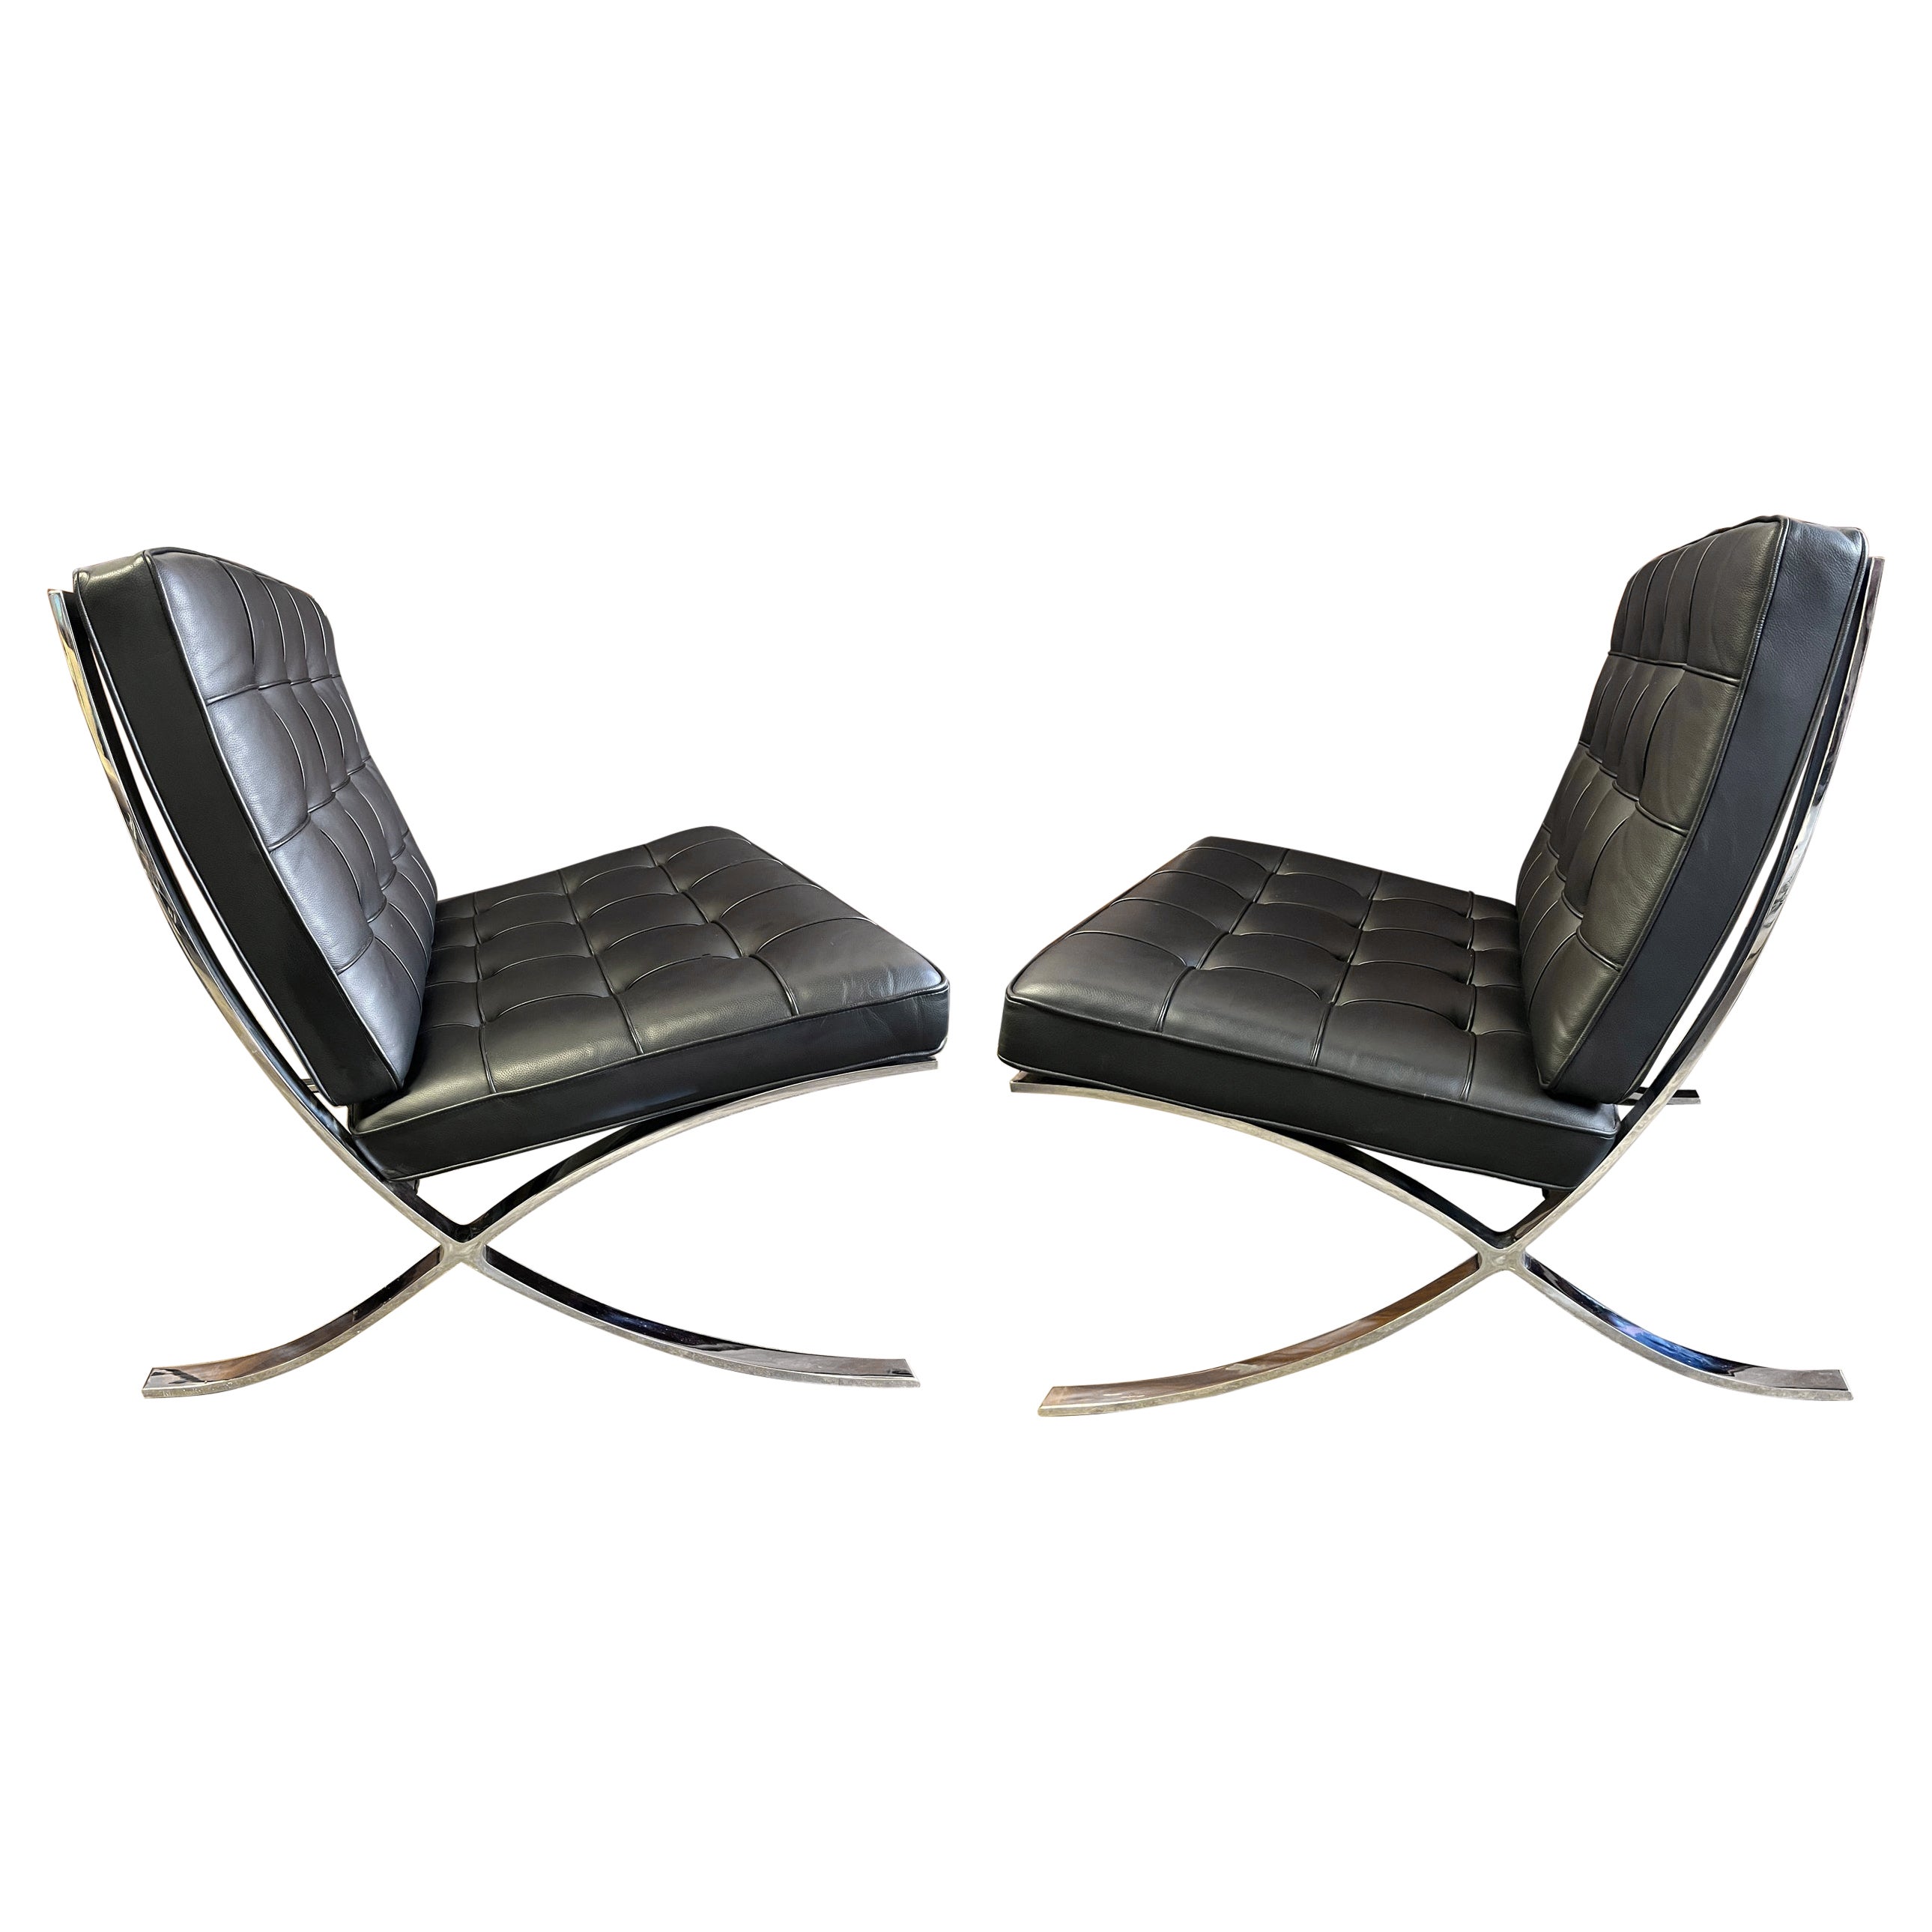 For your consideration are up to six Barcelona lounge chairs by Ludwig Mies van der Rohe for Knoll in black leather. The classic chair that helped define midcentury modernism. Featuring tufted cushions on a chrome frame. The frame is stamped